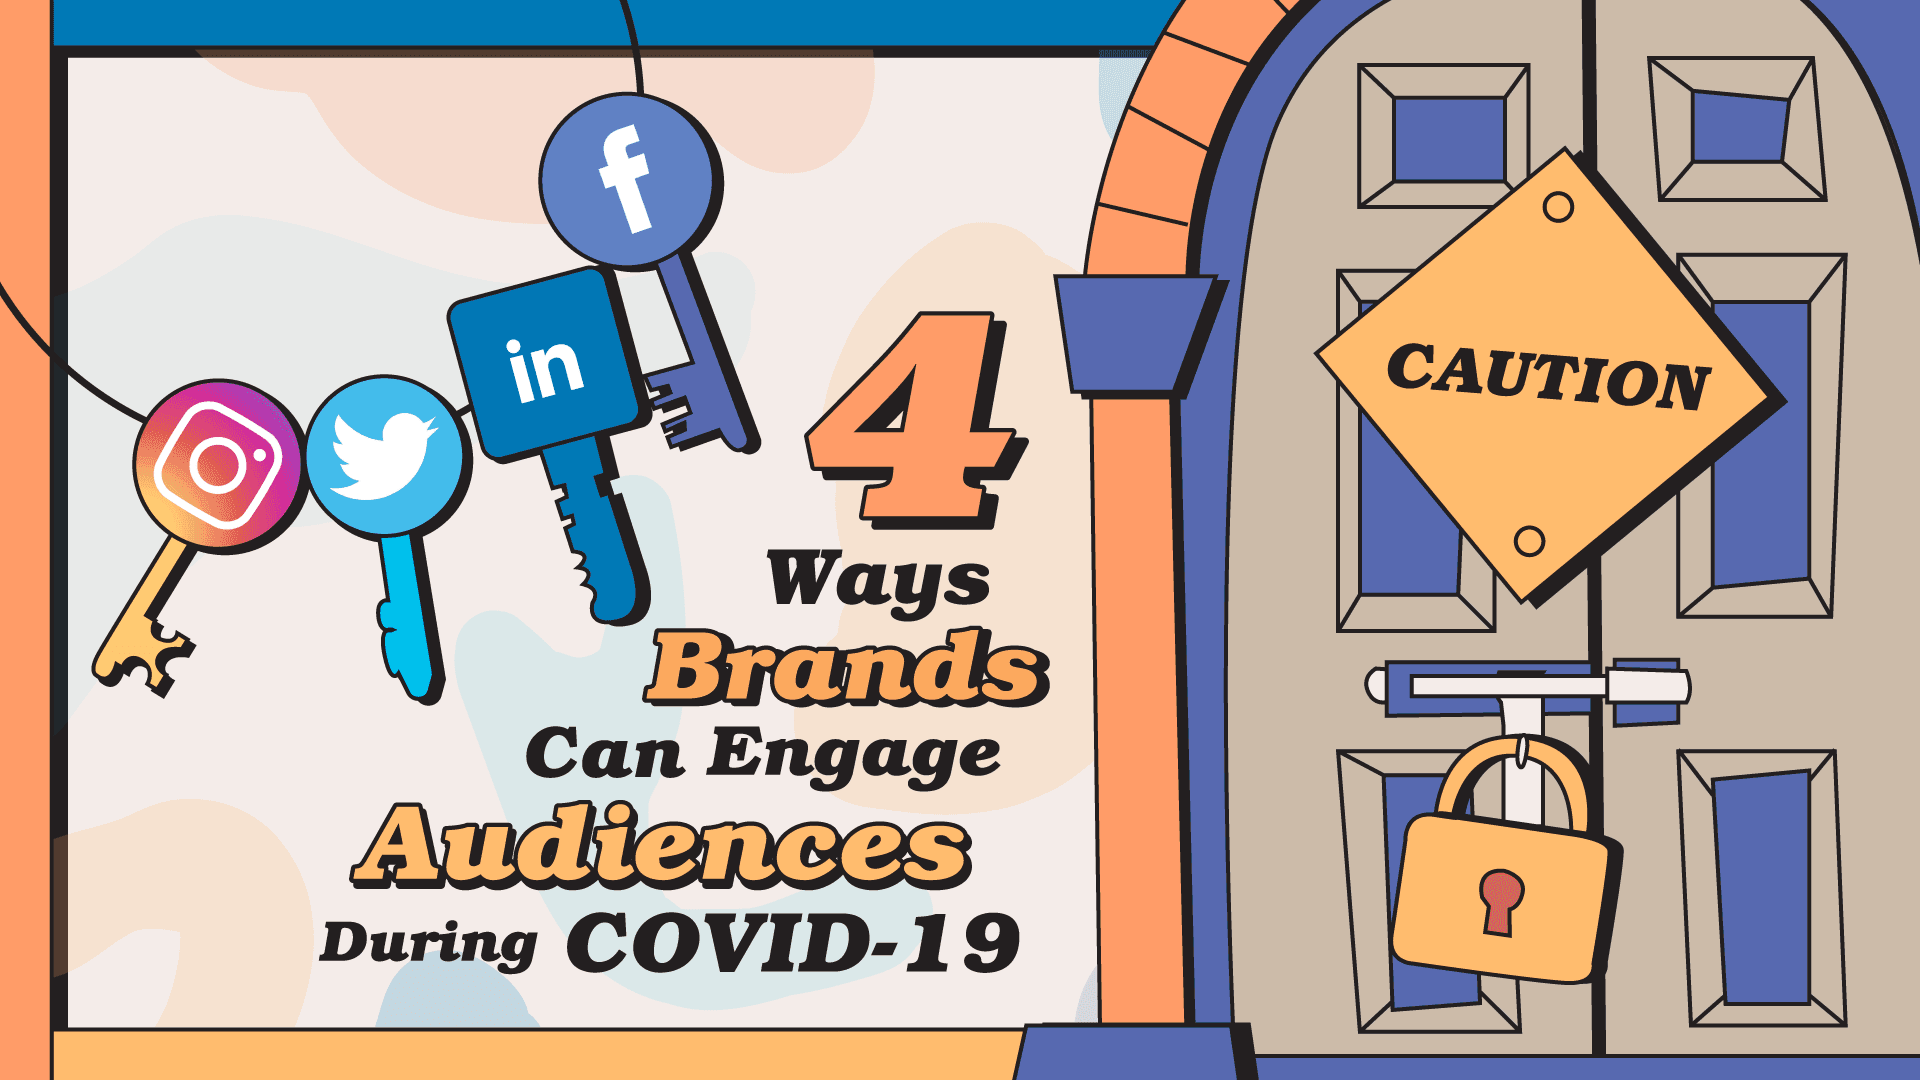 Article Image - 4 ways brands can engage audiences during COVID-19